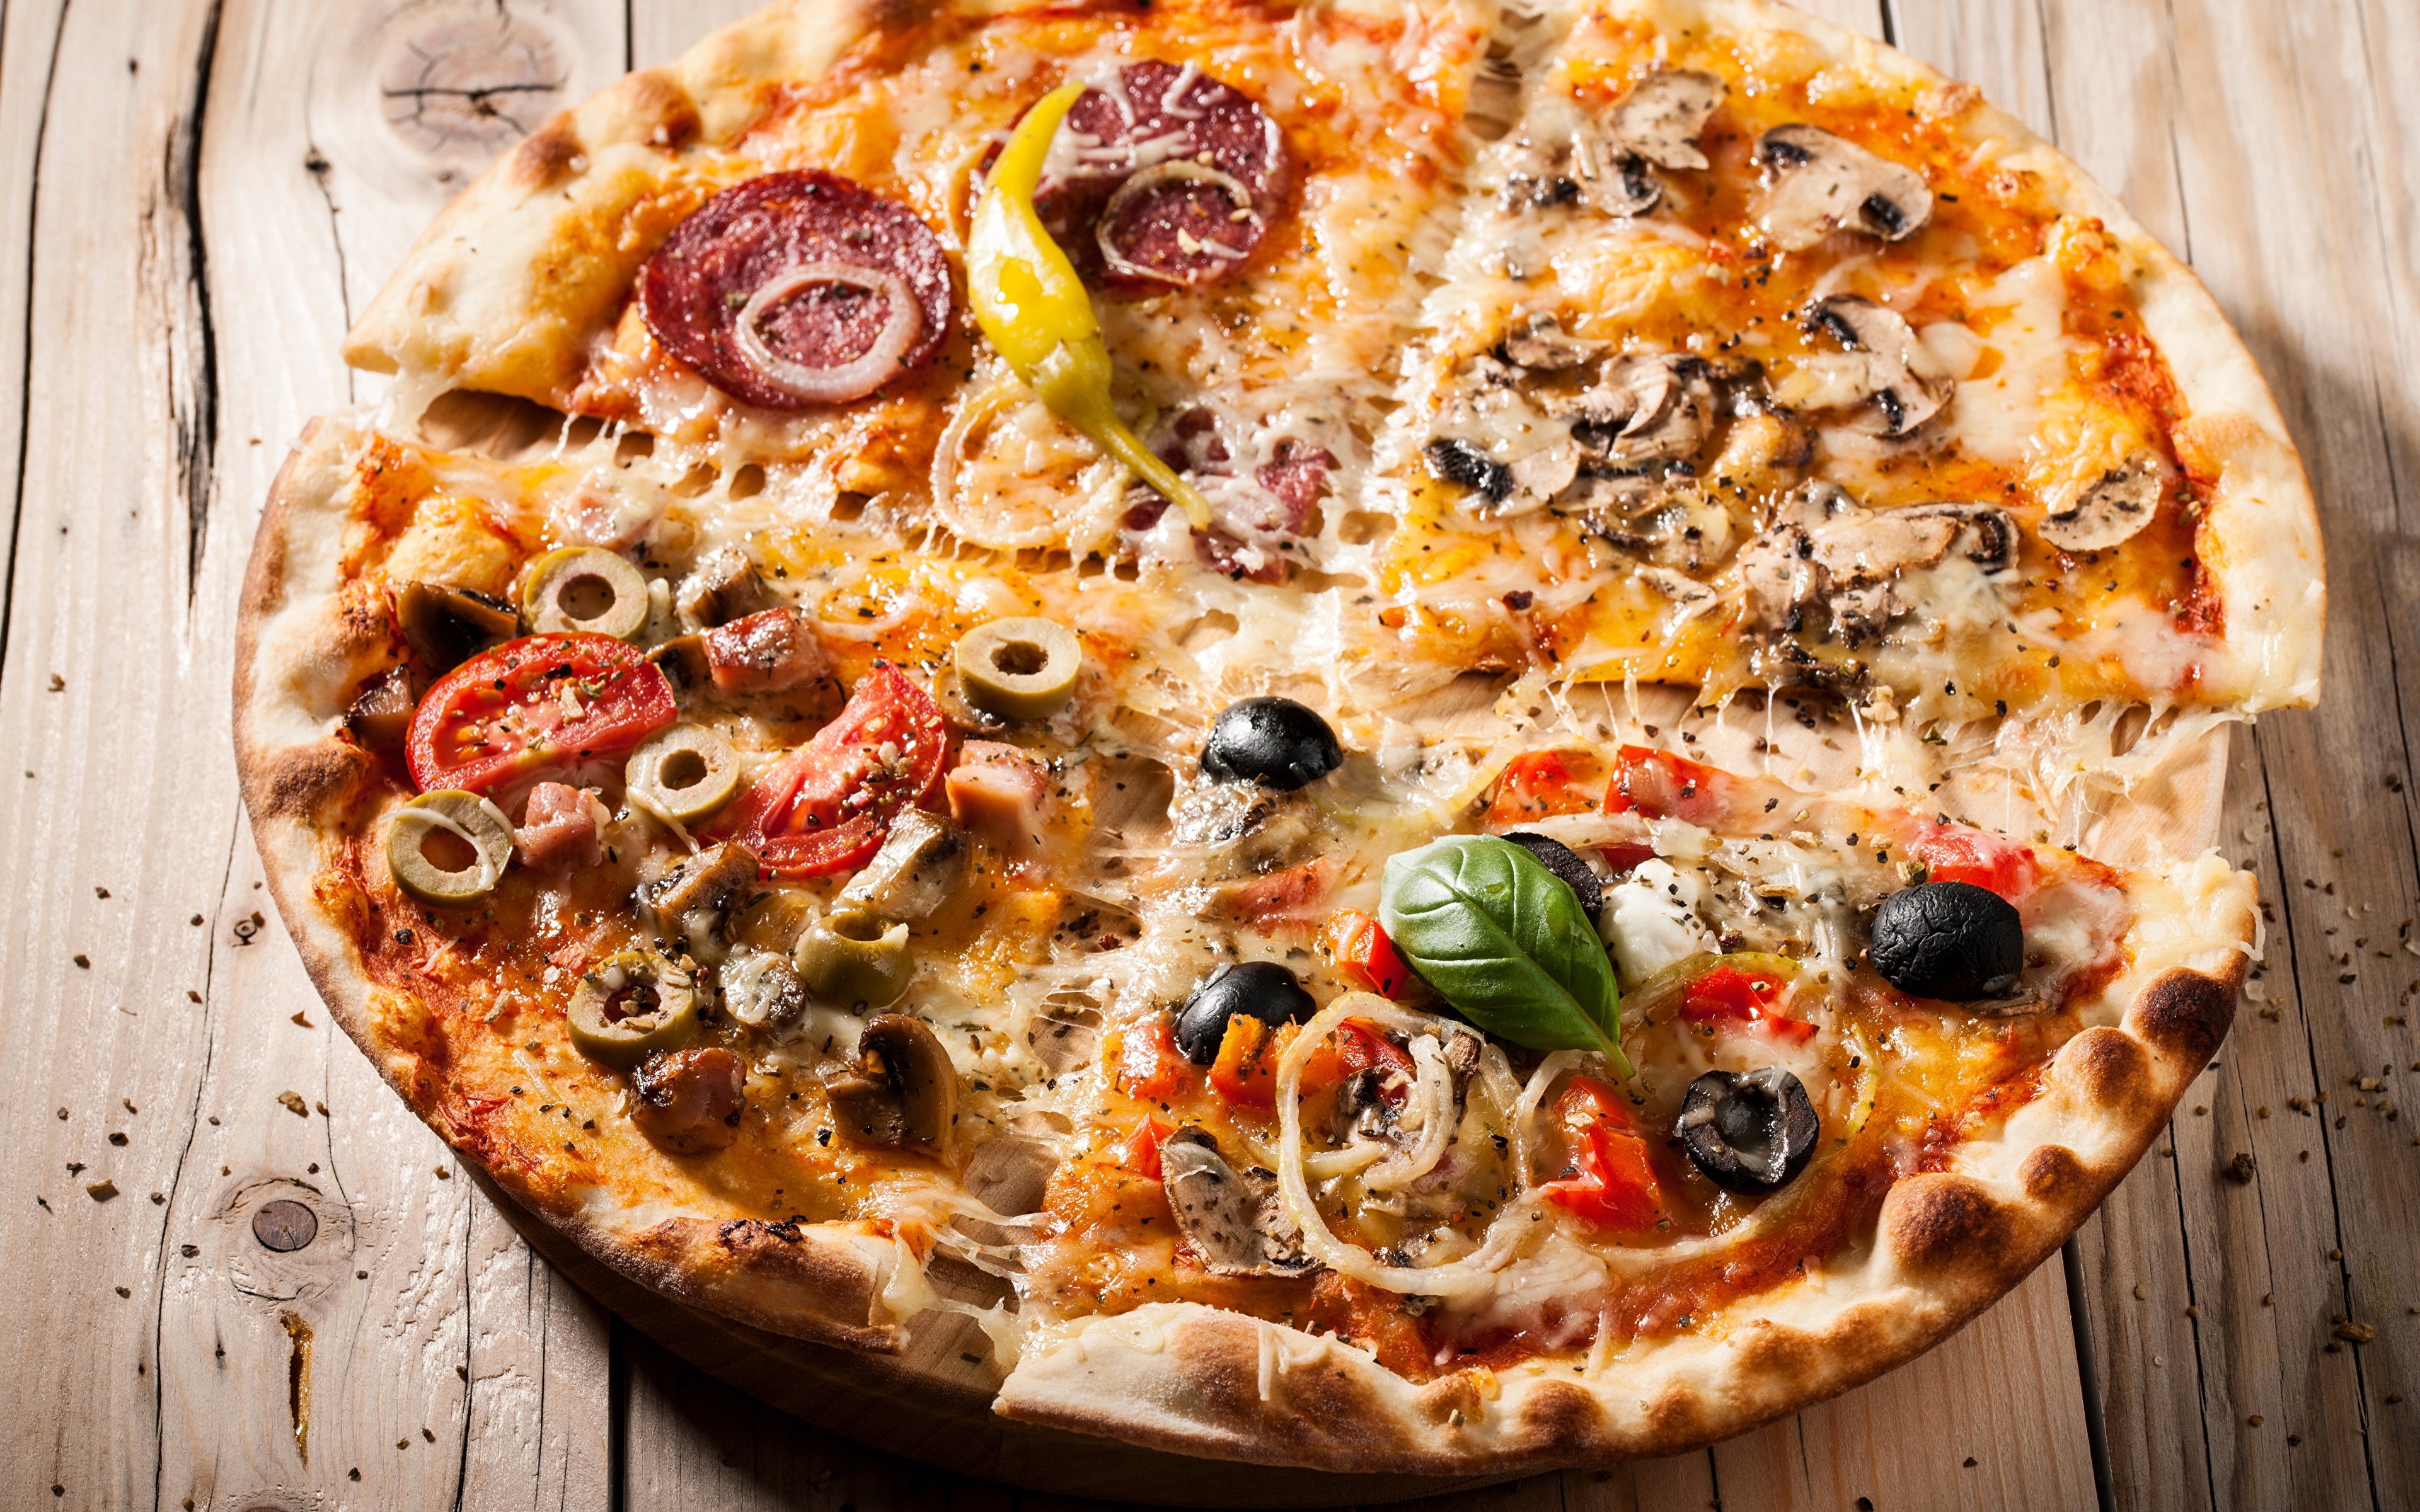 Learn the art of pizza with DeliciousRound: Masterclasses to make the best pizzas!